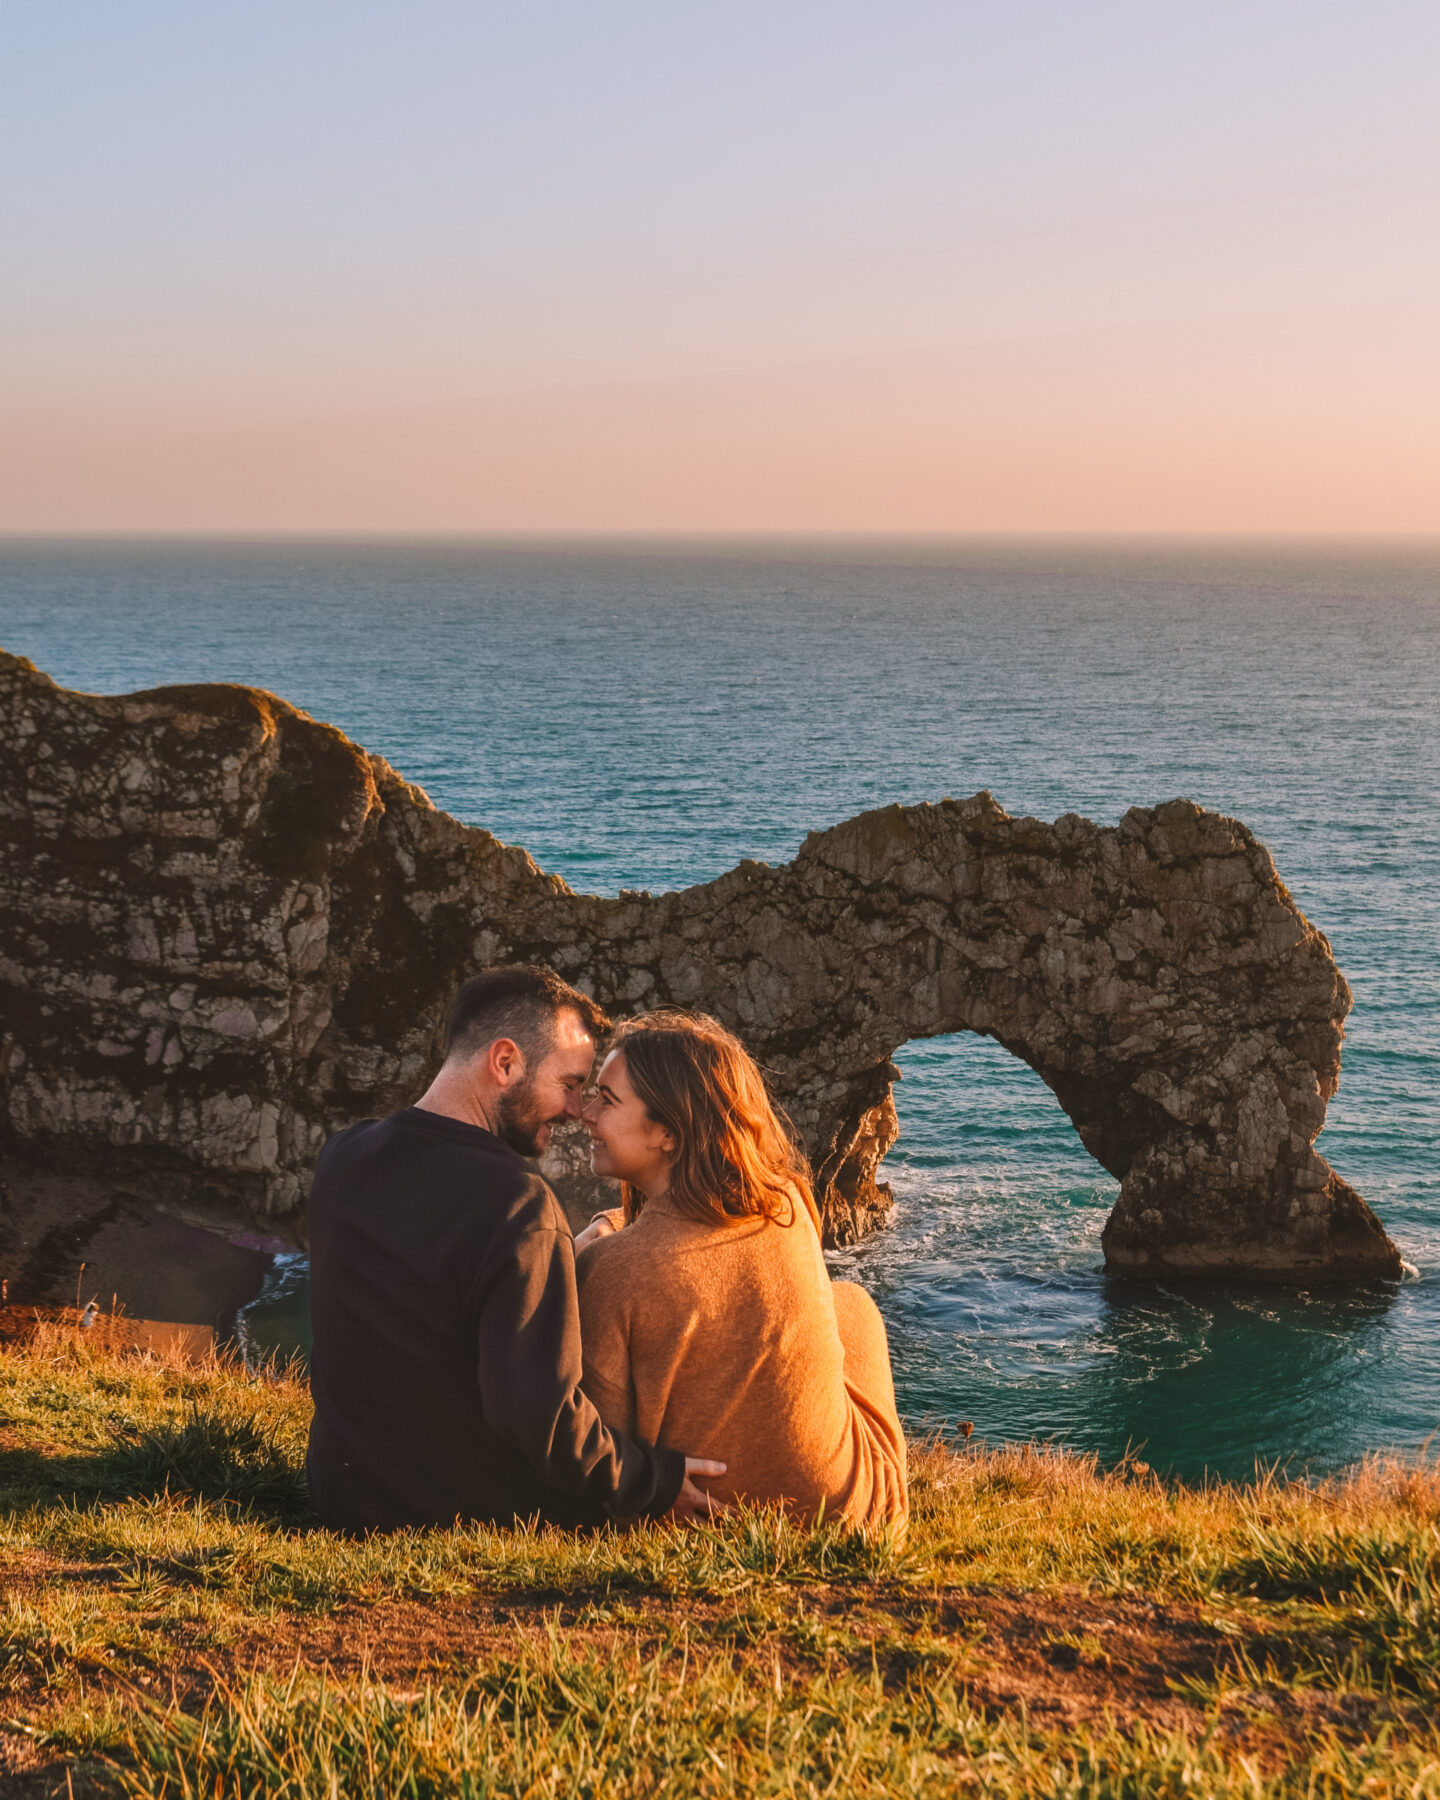 Places to visit in Dorset - Durdle Door at sunset